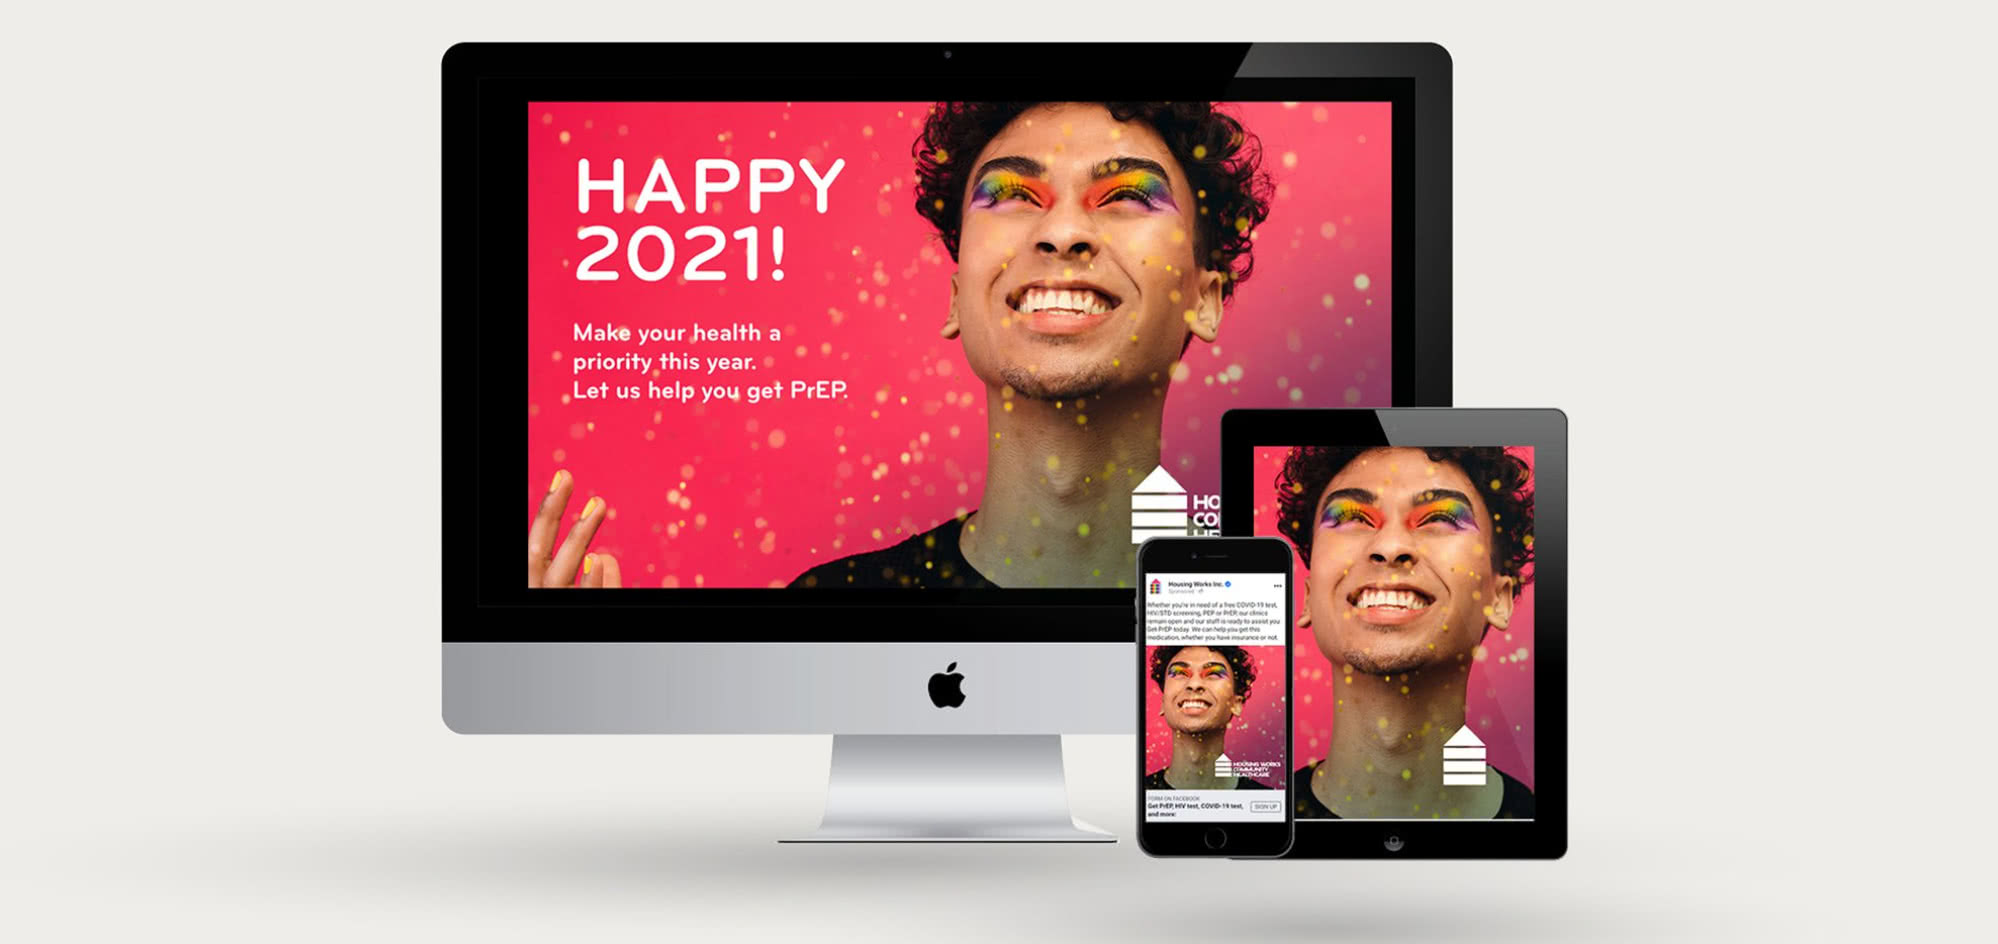 Screenshots on an iMac, iPad, iPhone of campaign featuring Smiling man with rainbow eye makeup. 
Text content: 
Happy 2021!  Make your health a priority this year.  Let us help you get PrEP.  Housing Works Logo.